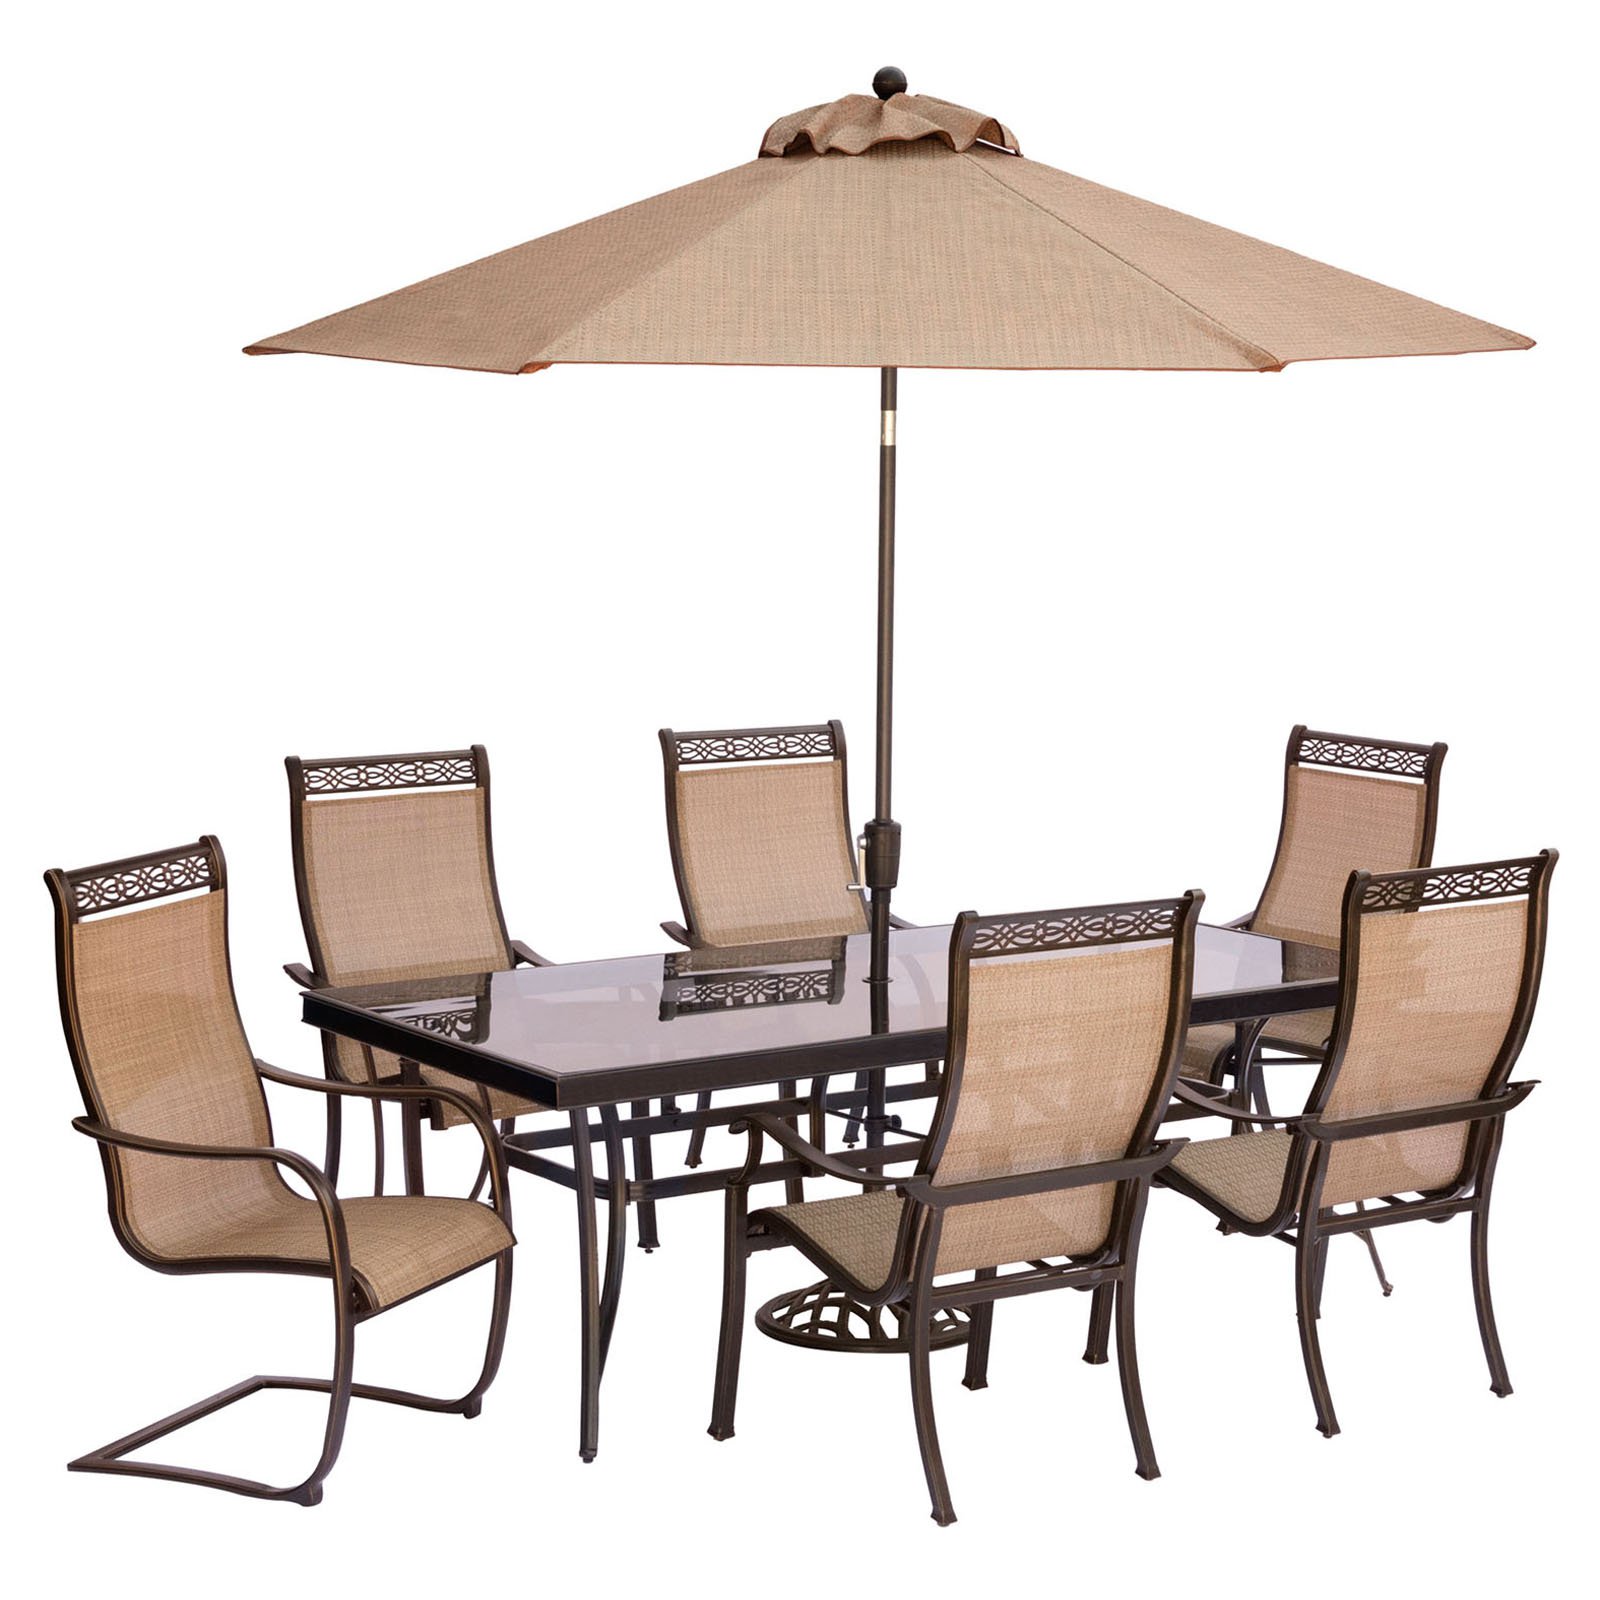 Hanover Outdoor Monaco 7-Piece Sling Dining Set with 42" x 84" Glass-Top Table, 4 Stationary Chairs and 2 C-Spring Chairs plus Umbrella with Stand, Cedar - image 1 of 11